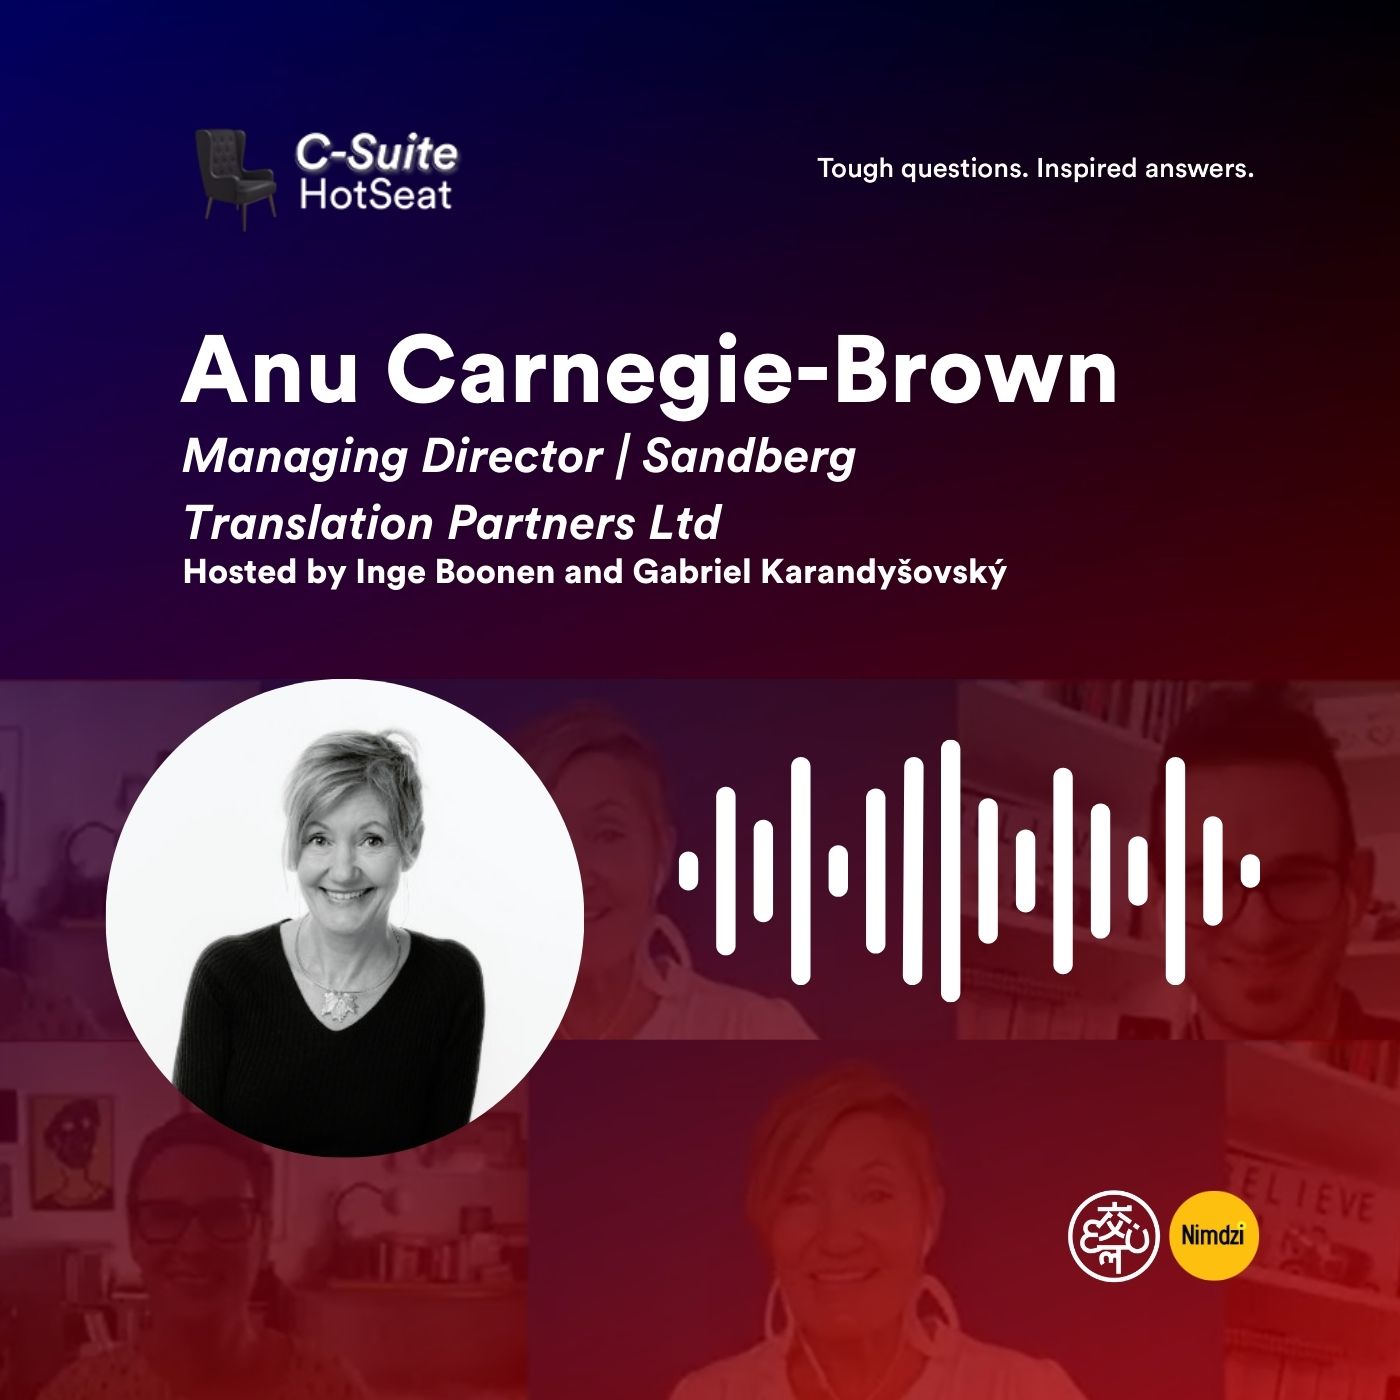 Learning Business with Anu Carnegie-Brown | C-Suite HotSeat E06